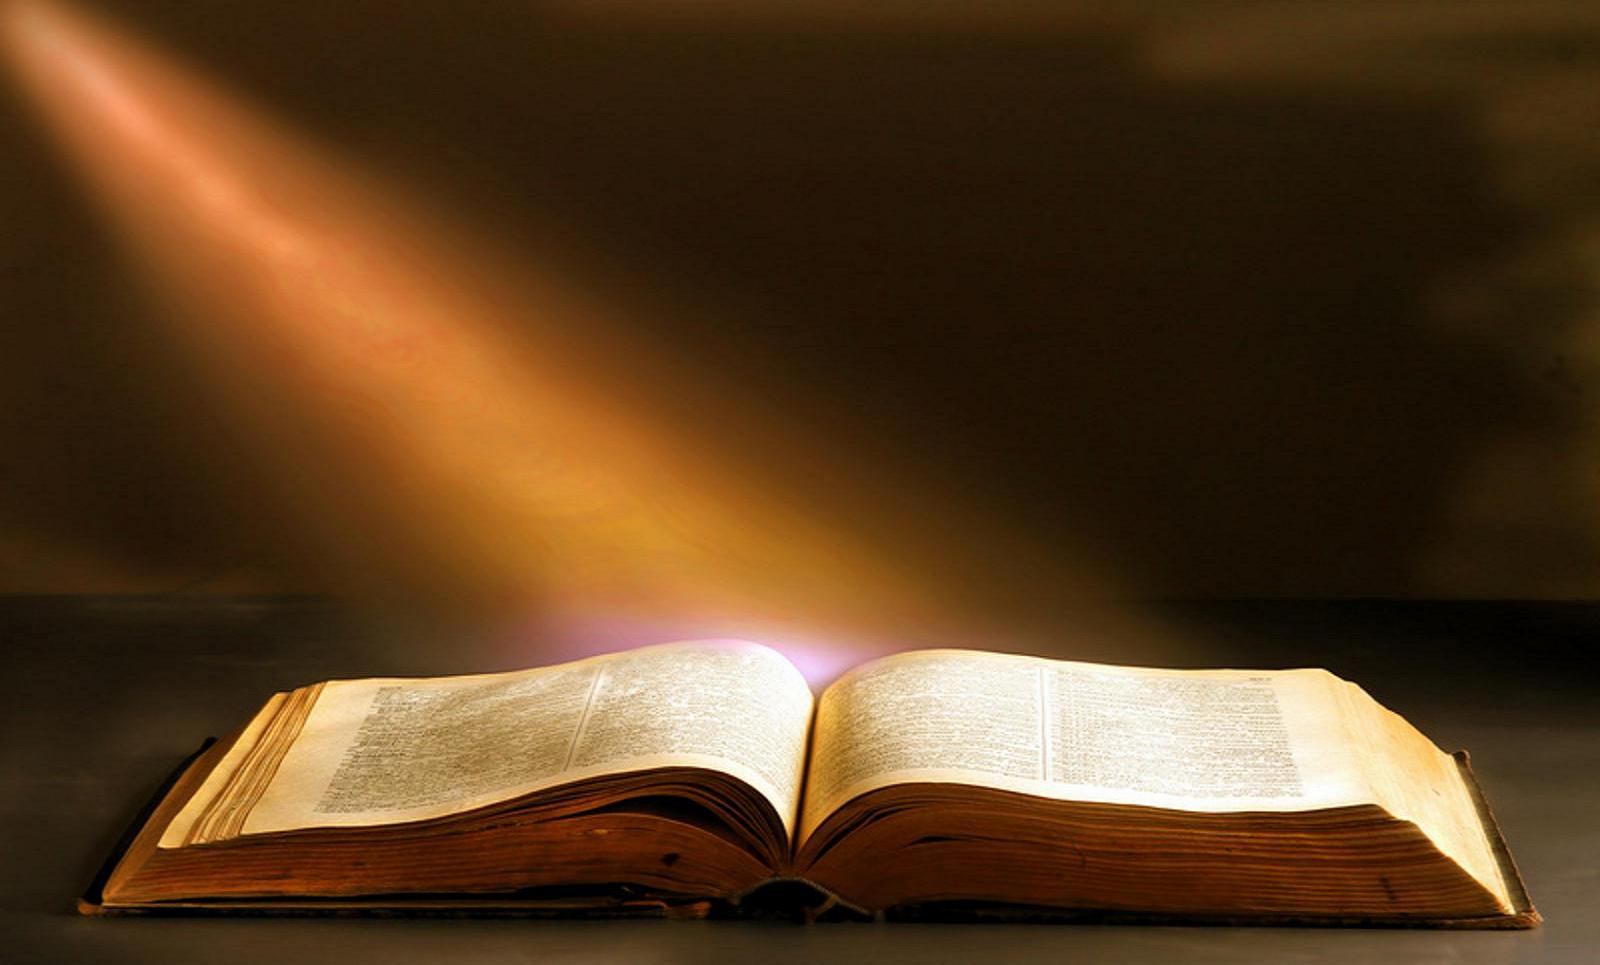 My Conscious Friends, Don’t Throw the Bible Away Just Yet